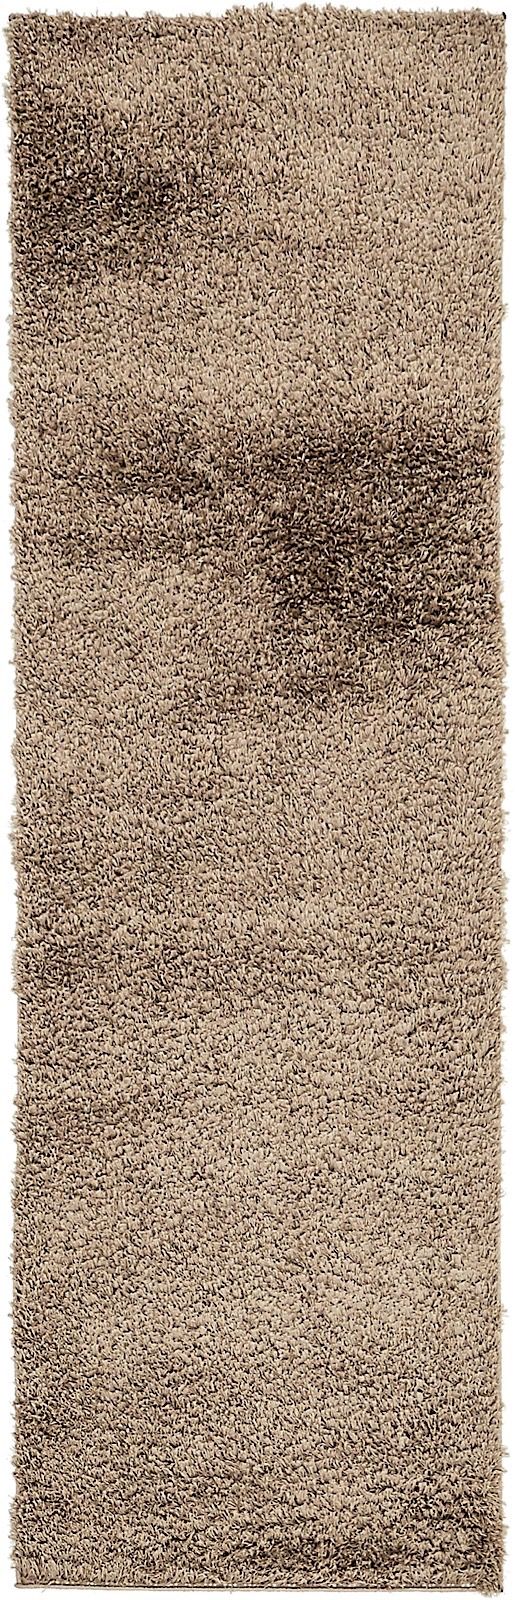 rugpal paramount shag area rug collection